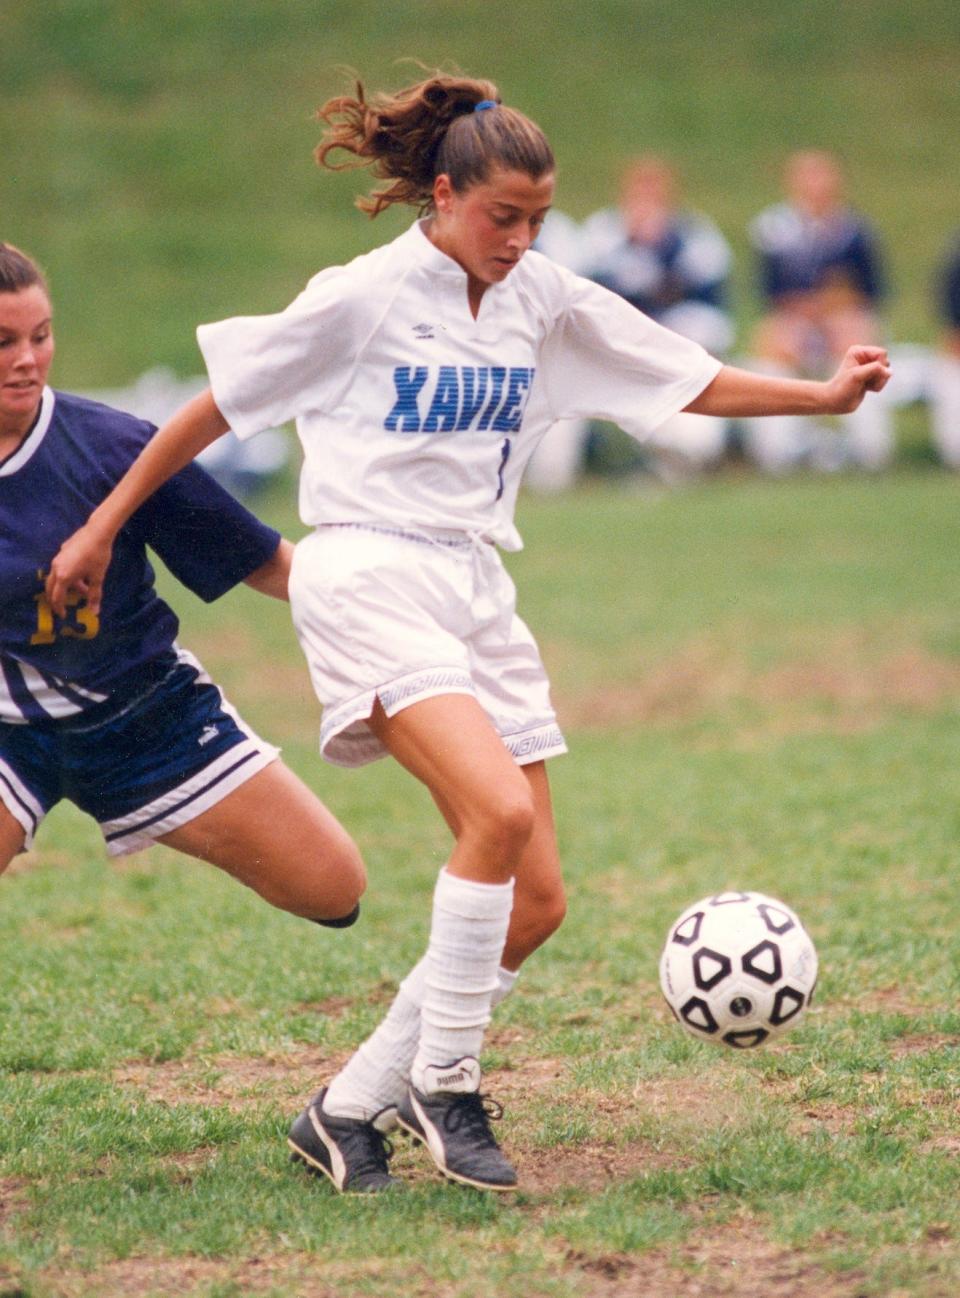 Amanda Gruber, a graduate of St. Ursula Academy, re-wrote the Xavier soccer record books. She still holds the school records for the most goals in a season (24 in 1997) and a career (67), most points in a season (59 in 1997) and a career (160).